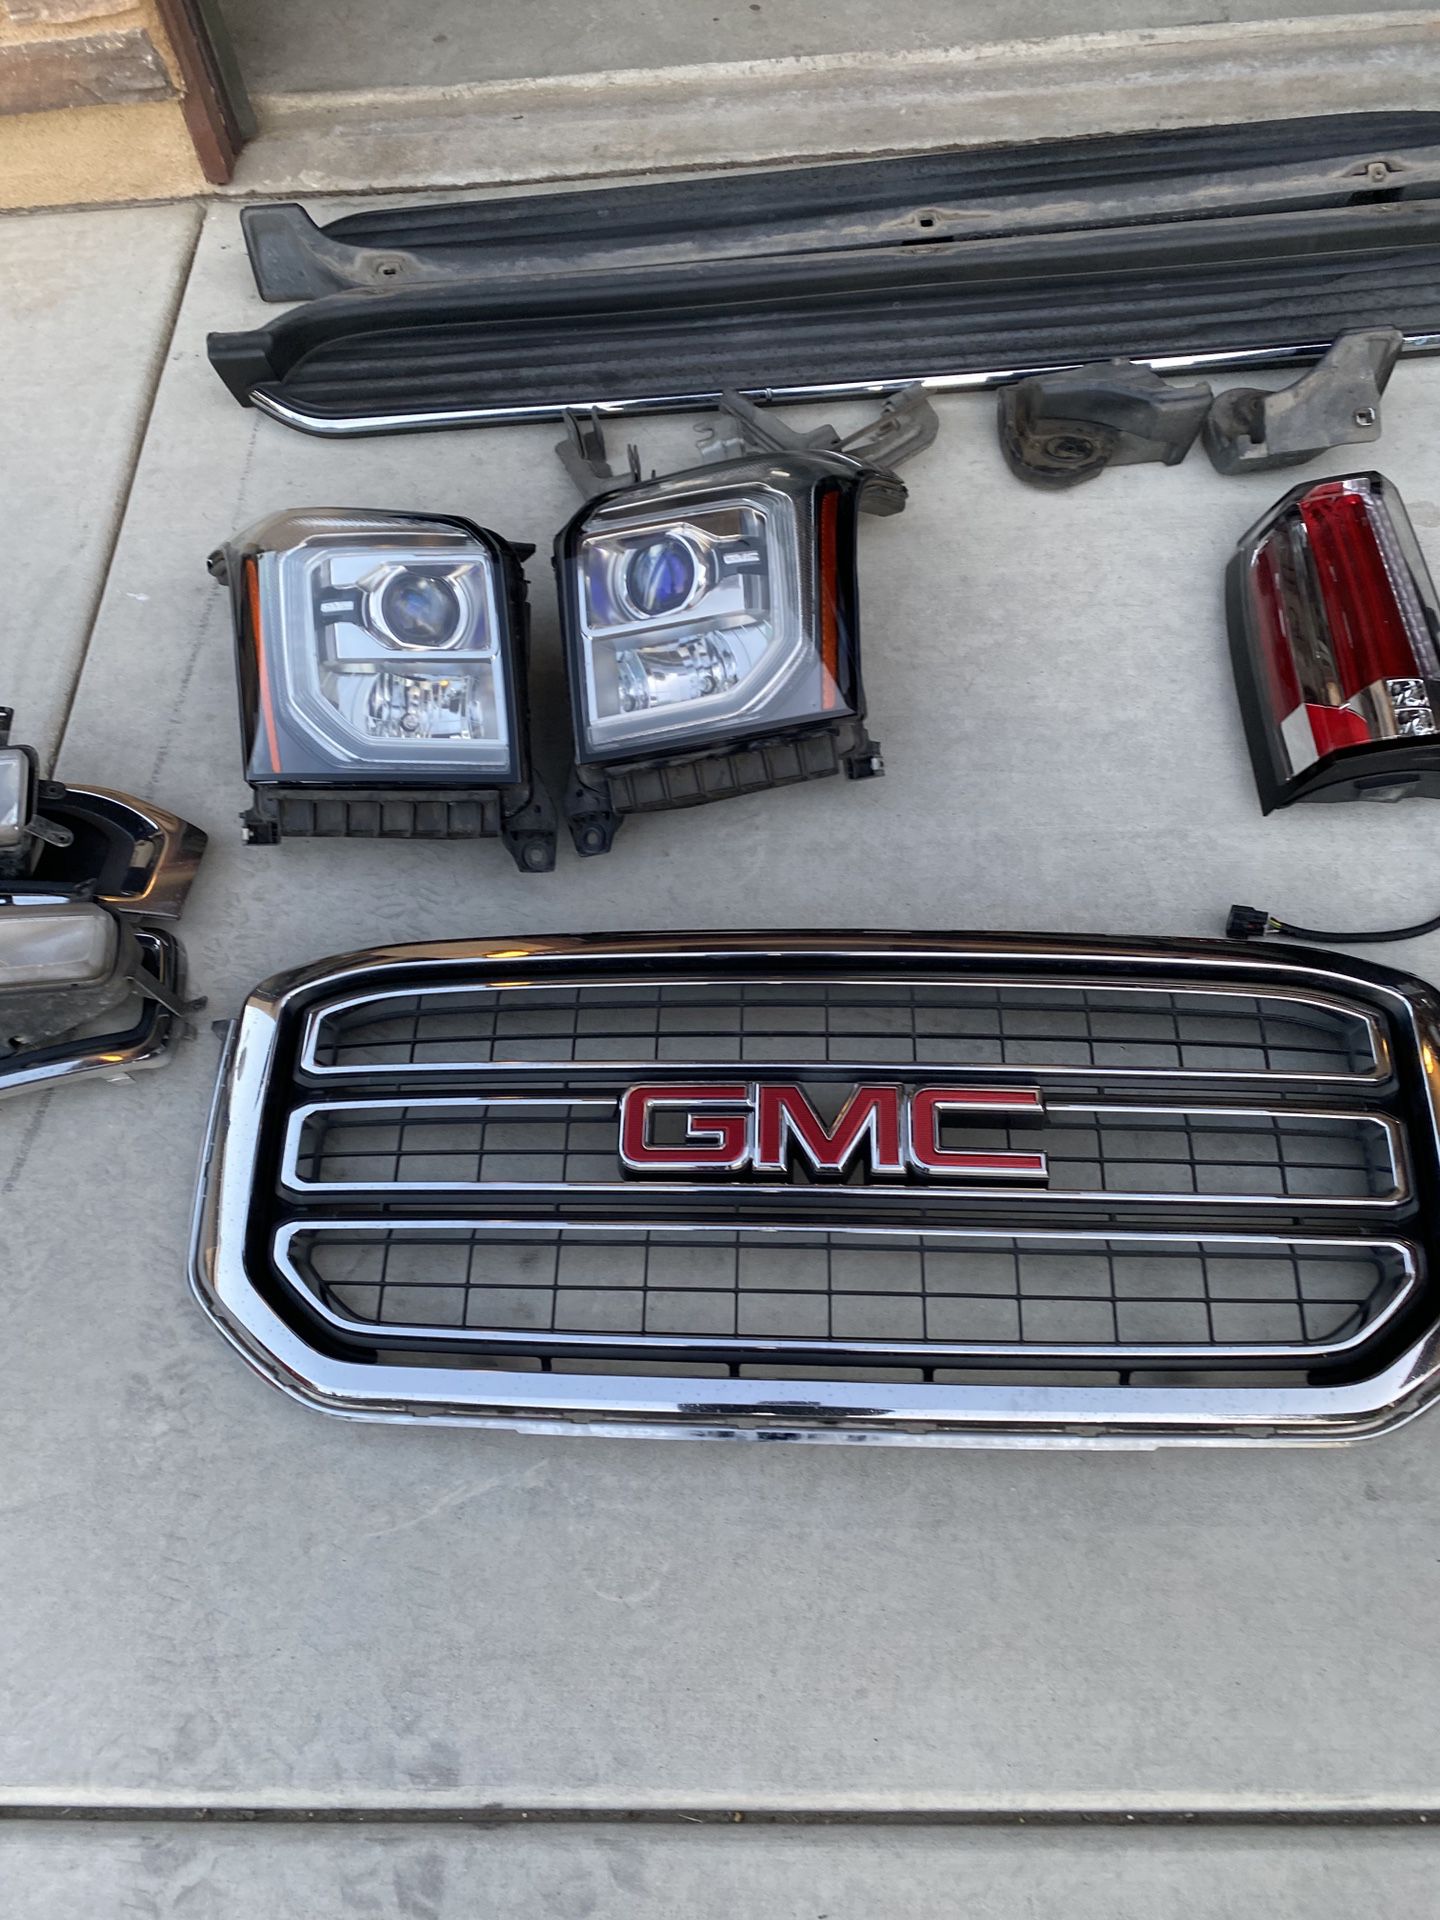 Misc auto parts off a 2015 GMC YUKON SLT. $100 per set pieces or $300 for all parts OBO. All parts are in good working order.